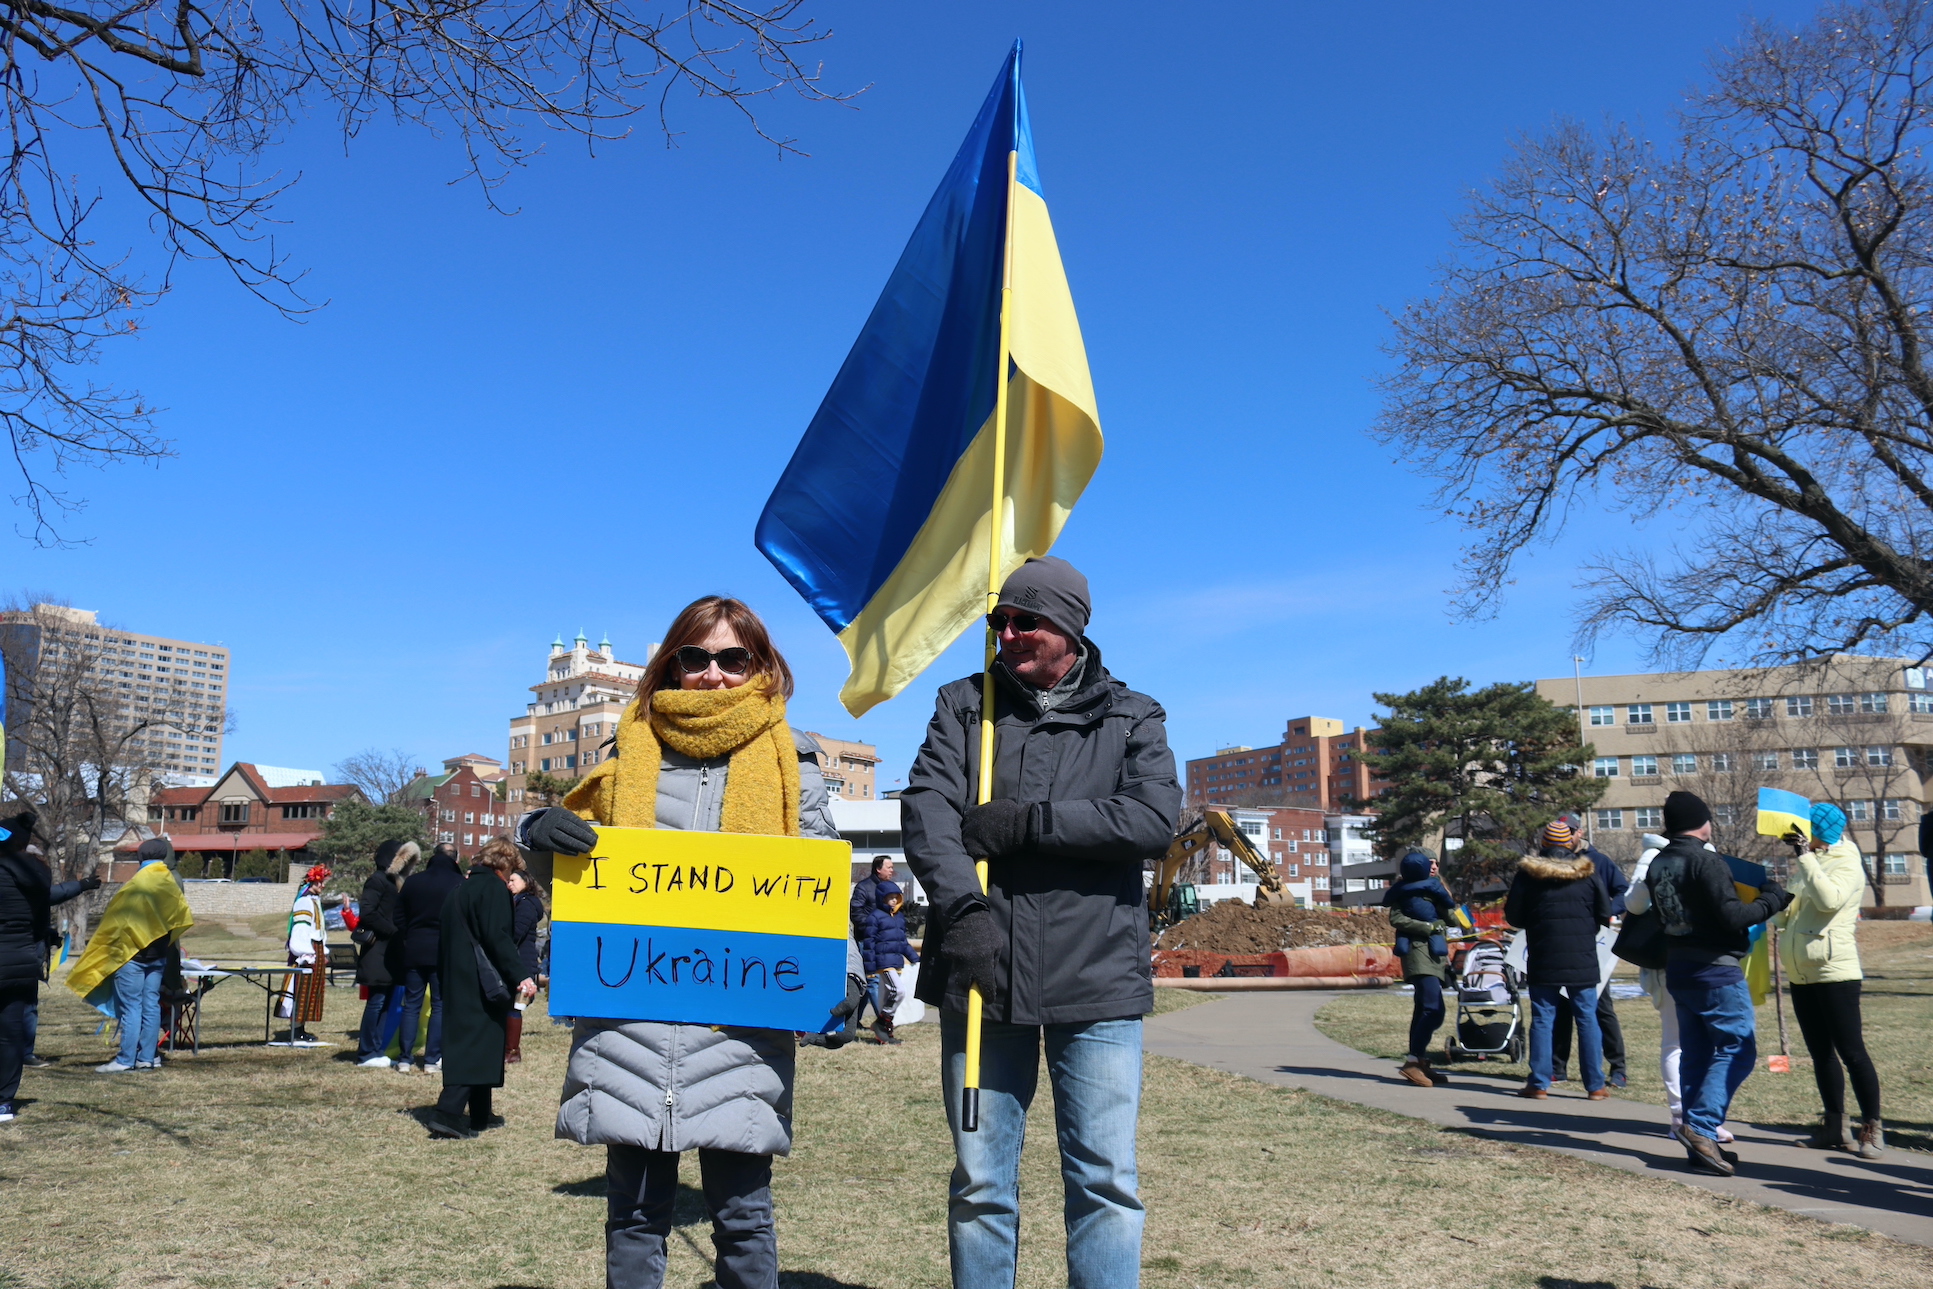 Woman holds sign that reads "I stand with Ukraine" man next to her holds Ukrainian flag.